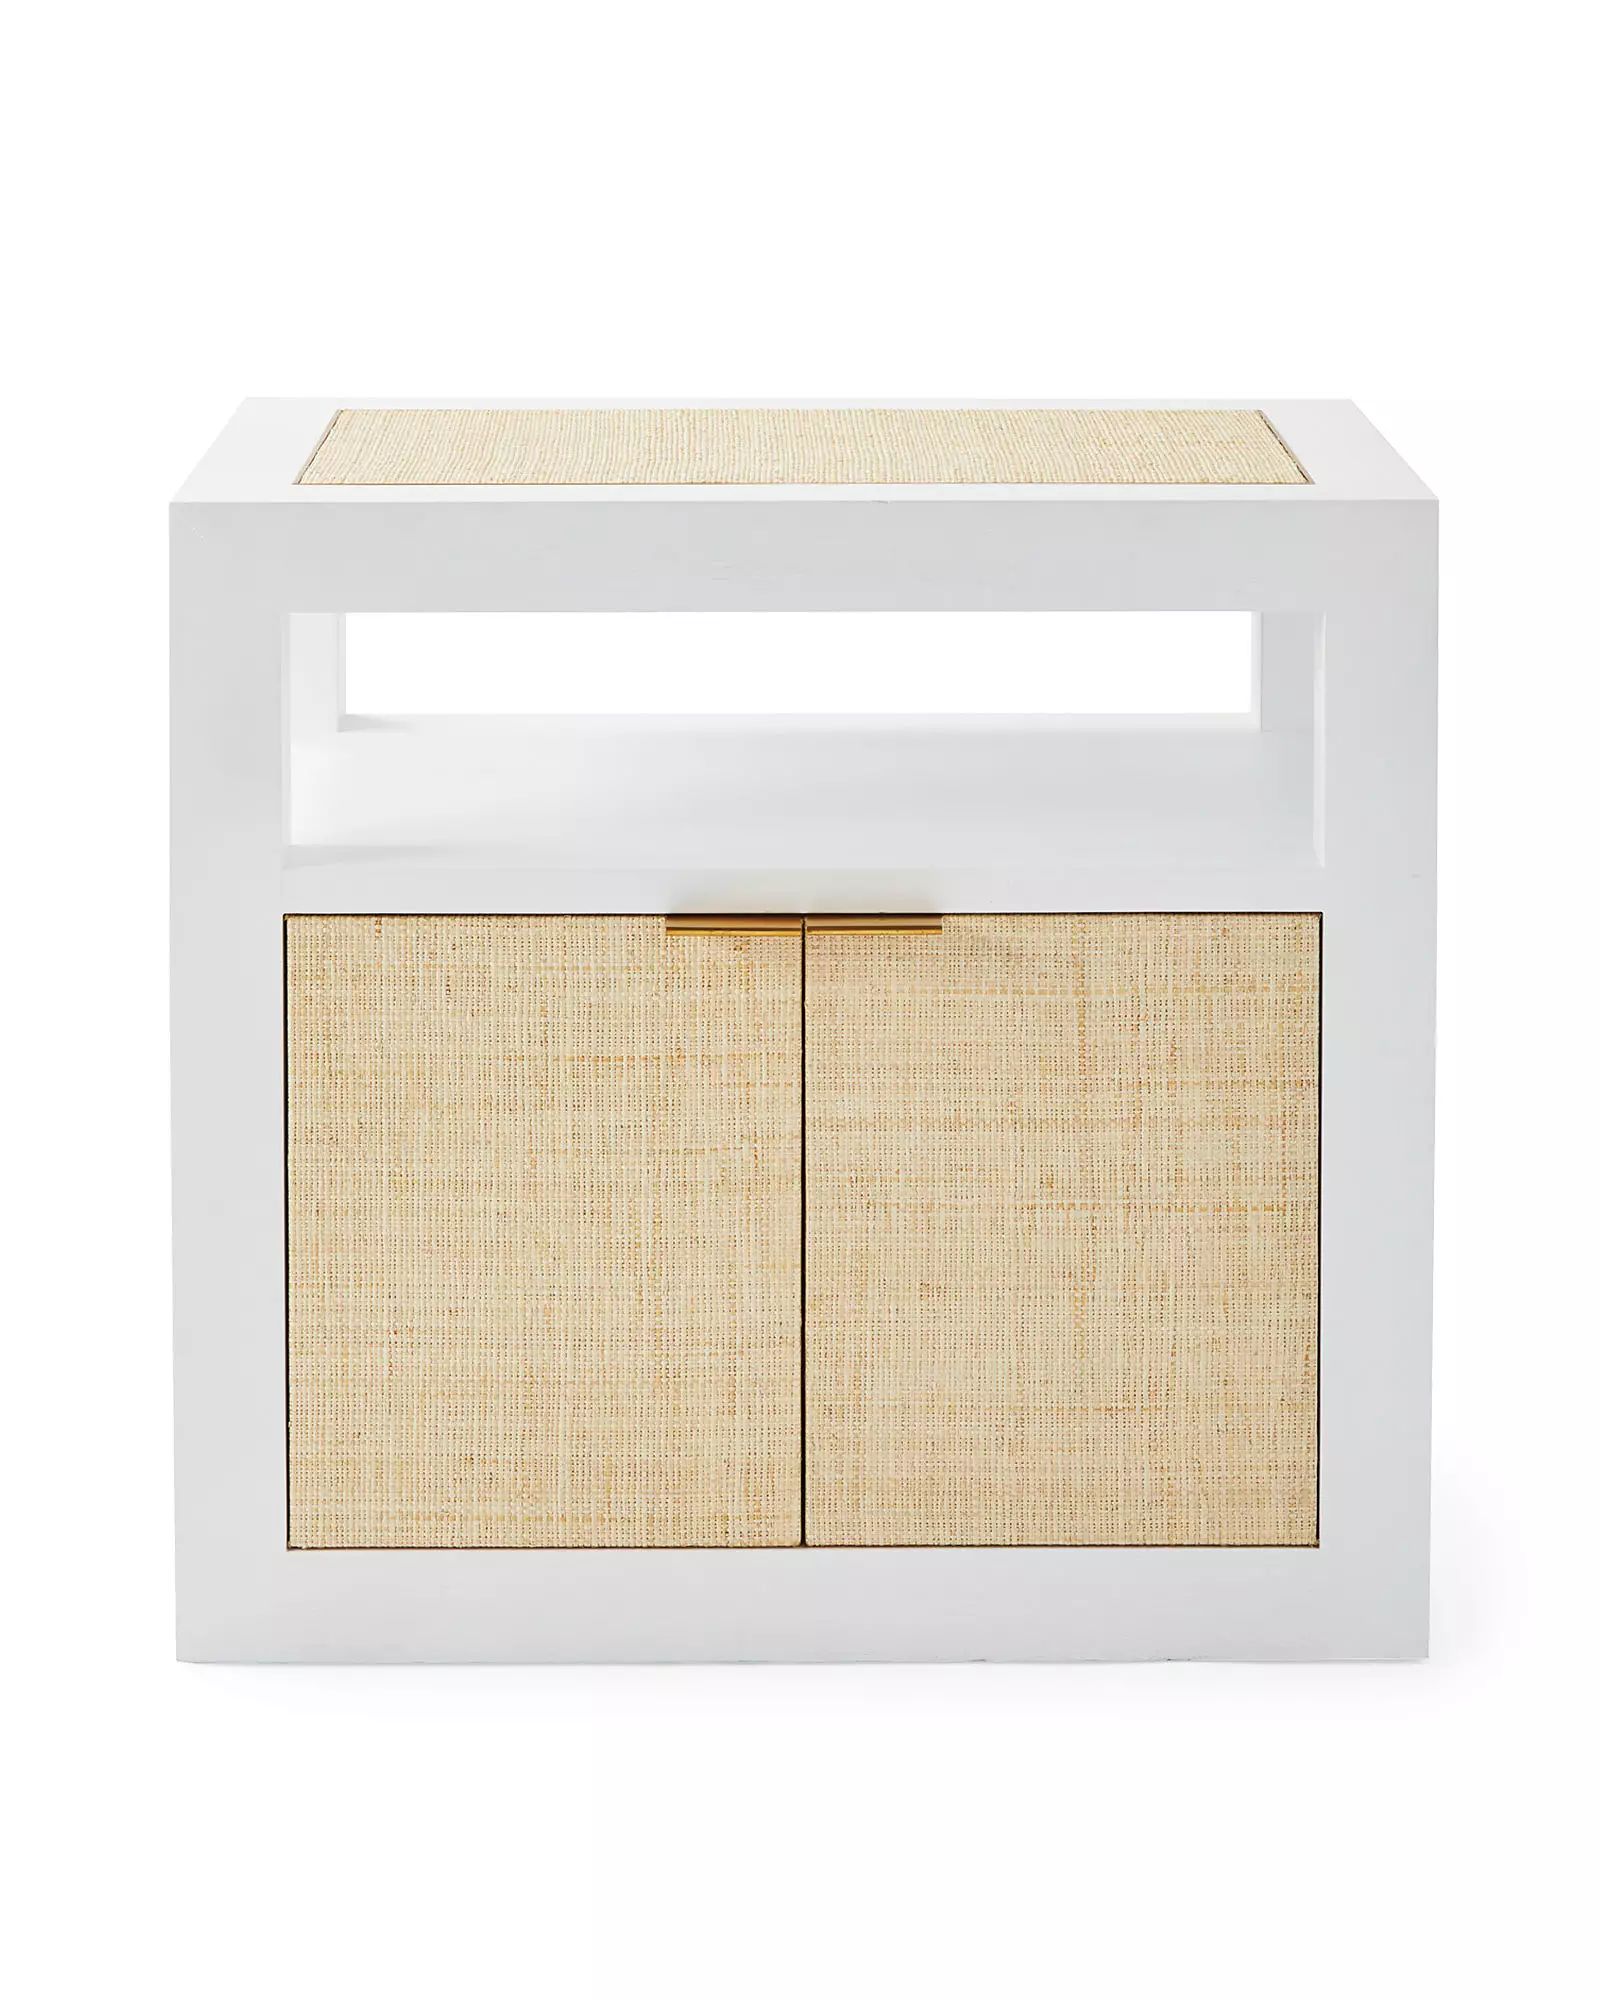 Mercer Nightstand | Serena and Lily